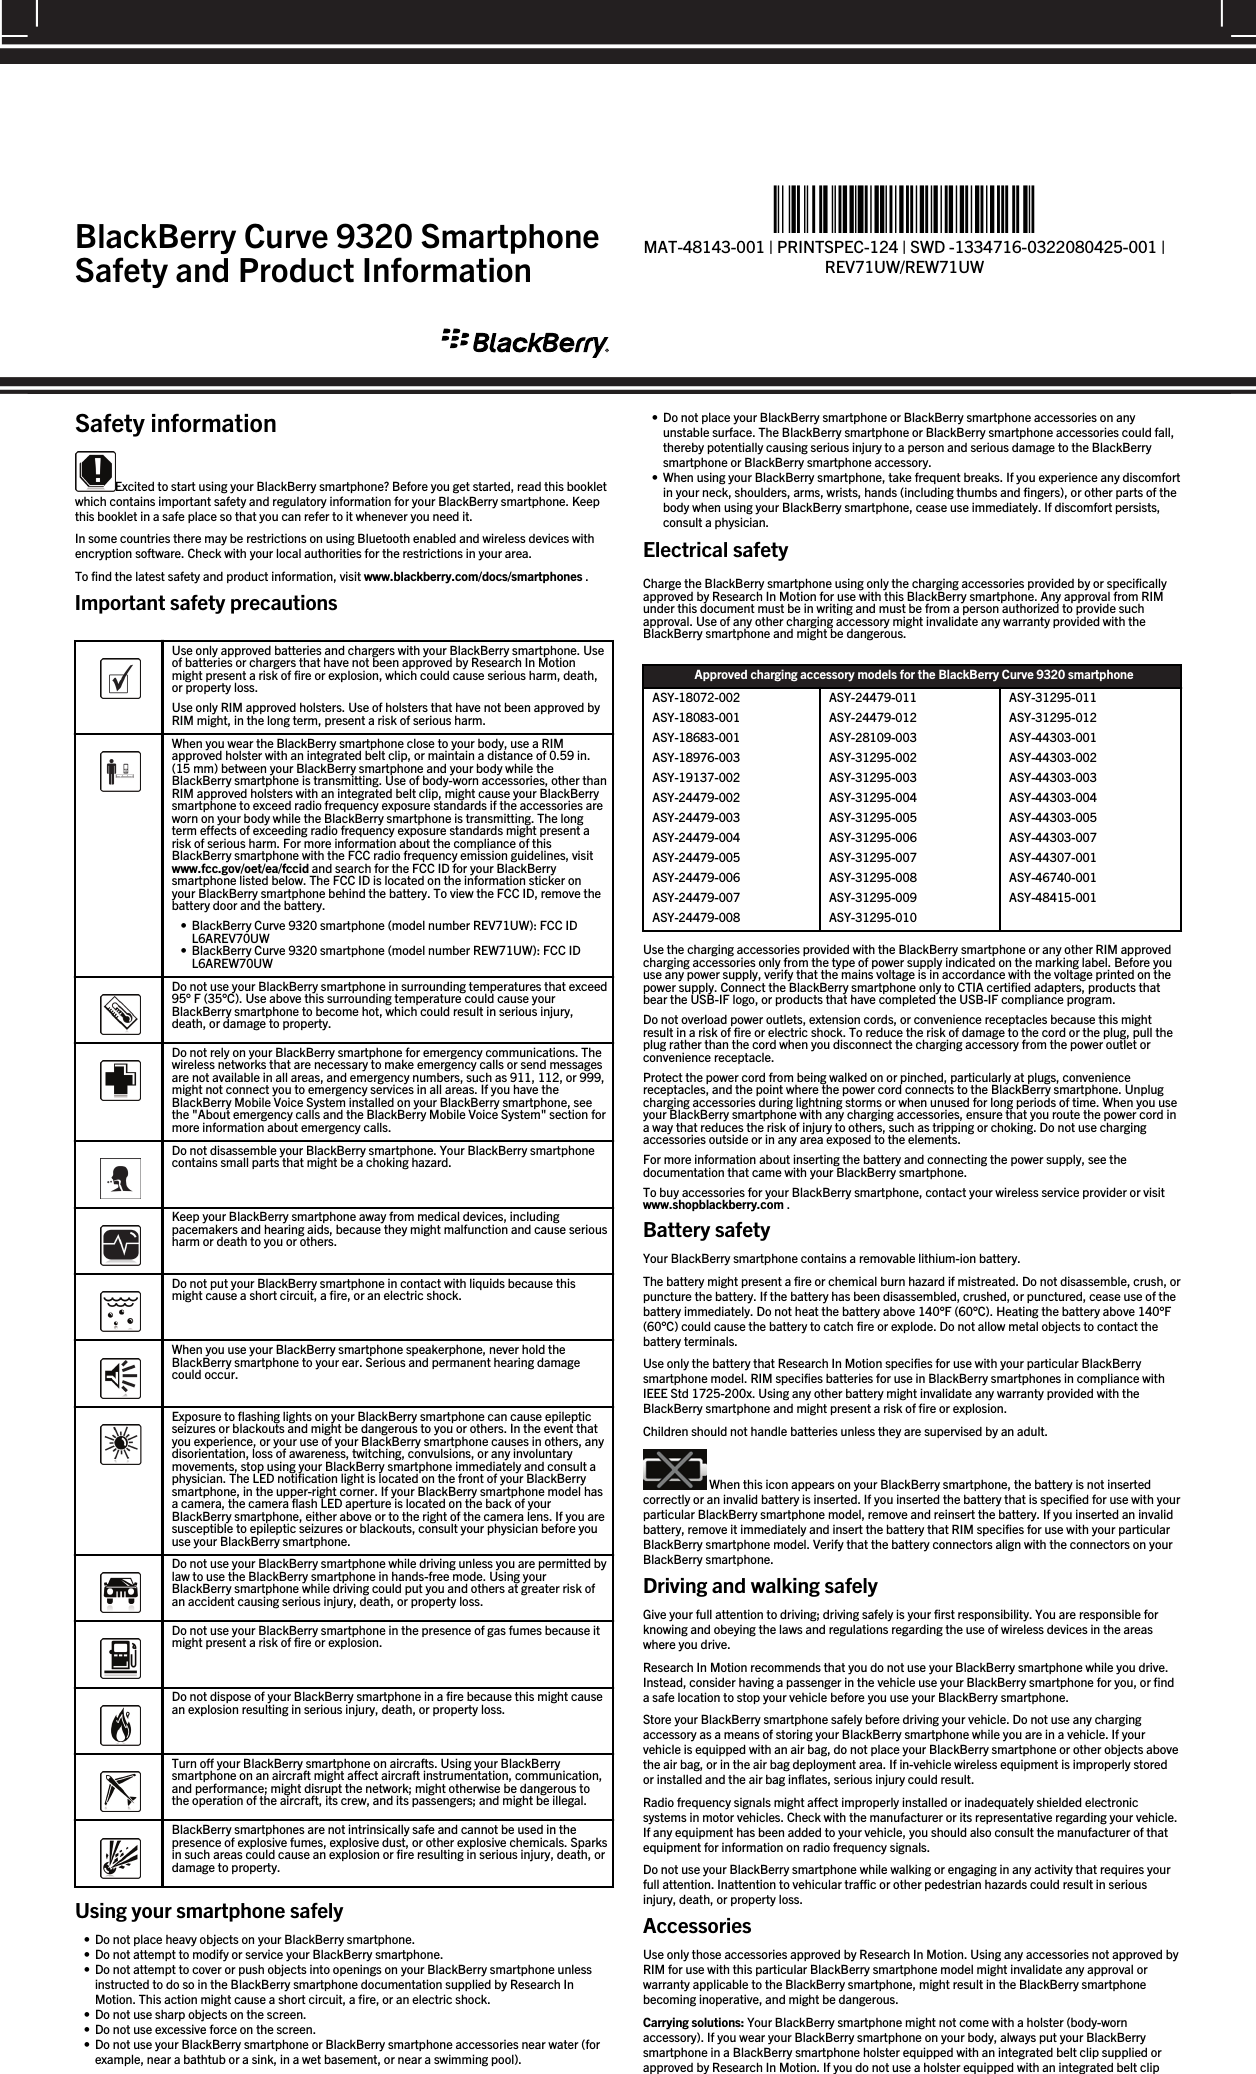 Safety informationExcited to start using your BlackBerry smartphone? Before you get started, read this bookletwhich contains important safety and regulatory information for your BlackBerry smartphone. Keepthis booklet in a safe place so that you can refer to it whenever you need it.In some countries there may be restrictions on using Bluetooth enabled and wireless devices withencryption software. Check with your local authorities for the restrictions in your area.To find the latest safety and product information, visit www.blackberry.com/docs/smartphones .Important safety precautions  Use only approved batteries and chargers with your BlackBerry smartphone. Useof batteries or chargers that have not been approved by Research In Motionmight present a risk of fire or explosion, which could cause serious harm, death,or property loss.Use only RIM approved holsters. Use of holsters that have not been approved byRIM might, in the long term, present a risk of serious harm.  When you wear the BlackBerry smartphone close to your body, use a RIMapproved holster with an integrated belt clip, or maintain a distance of 0.59 in.(15 mm) between your BlackBerry smartphone and your body while theBlackBerry smartphone is transmitting. Use of body-worn accessories, other thanRIM approved holsters with an integrated belt clip, might cause your BlackBerrysmartphone to exceed radio frequency exposure standards if the accessories areworn on your body while the BlackBerry smartphone is transmitting. The longterm effects of exceeding radio frequency exposure standards might present arisk of serious harm. For more information about the compliance of thisBlackBerry smartphone with the FCC radio frequency emission guidelines, visitwww.fcc.gov/oet/ea/fccid and search for the FCC ID for your BlackBerrysmartphone listed below. The FCC ID is located on the information sticker onyour BlackBerry smartphone behind the battery. To view the FCC ID, remove thebattery door and the battery.• BlackBerry Curve 9320 smartphone (model number REV71UW): FCC IDL6AREV70UW• BlackBerry Curve 9320 smartphone (model number REW71UW): FCC IDL6AREW70UW  Do not use your BlackBerry smartphone in surrounding temperatures that exceed95° F (35°C). Use above this surrounding temperature could cause yourBlackBerry smartphone to become hot, which could result in serious injury,death, or damage to property.  Do not rely on your BlackBerry smartphone for emergency communications. Thewireless networks that are necessary to make emergency calls or send messagesare not available in all areas, and emergency numbers, such as 911, 112, or 999,might not connect you to emergency services in all areas. If you have theBlackBerry Mobile Voice System installed on your BlackBerry smartphone, seethe &quot;About emergency calls and the BlackBerry Mobile Voice System&quot; section formore information about emergency calls.  Do not disassemble your BlackBerry smartphone. Your BlackBerry smartphonecontains small parts that might be a choking hazard.  Keep your BlackBerry smartphone away from medical devices, includingpacemakers and hearing aids, because they might malfunction and cause seriousharm or death to you or others.  Do not put your BlackBerry smartphone in contact with liquids because thismight cause a short circuit, a fire, or an electric shock.  When you use your BlackBerry smartphone speakerphone, never hold theBlackBerry smartphone to your ear. Serious and permanent hearing damagecould occur.  Exposure to flashing lights on your BlackBerry smartphone can cause epilepticseizures or blackouts and might be dangerous to you or others. In the event thatyou experience, or your use of your BlackBerry smartphone causes in others, anydisorientation, loss of awareness, twitching, convulsions, or any involuntarymovements, stop using your BlackBerry smartphone immediately and consult aphysician. The LED notification light is located on the front of your BlackBerrysmartphone, in the upper-right corner. If your BlackBerry smartphone model hasa camera, the camera flash LED aperture is located on the back of yourBlackBerry smartphone, either above or to the right of the camera lens. If you aresusceptible to epileptic seizures or blackouts, consult your physician before youuse your BlackBerry smartphone.  Do not use your BlackBerry smartphone while driving unless you are permitted bylaw to use the BlackBerry smartphone in hands-free mode. Using yourBlackBerry smartphone while driving could put you and others at greater risk ofan accident causing serious injury, death, or property loss.  Do not use your BlackBerry smartphone in the presence of gas fumes because itmight present a risk of fire or explosion.  Do not dispose of your BlackBerry smartphone in a fire because this might causean explosion resulting in serious injury, death, or property loss.  Turn off your BlackBerry smartphone on aircrafts. Using your BlackBerrysmartphone on an aircraft might affect aircraft instrumentation, communication,and performance; might disrupt the network; might otherwise be dangerous tothe operation of the aircraft, its crew, and its passengers; and might be illegal.  BlackBerry smartphones are not intrinsically safe and cannot be used in thepresence of explosive fumes, explosive dust, or other explosive chemicals. Sparksin such areas could cause an explosion or fire resulting in serious injury, death, ordamage to property.Using your smartphone safely• Do not place heavy objects on your BlackBerry smartphone.• Do not attempt to modify or service your BlackBerry smartphone.• Do not attempt to cover or push objects into openings on your BlackBerry smartphone unlessinstructed to do so in the BlackBerry smartphone documentation supplied by Research InMotion. This action might cause a short circuit, a fire, or an electric shock.• Do not use sharp objects on the screen.• Do not use excessive force on the screen.• Do not use your BlackBerry smartphone or BlackBerry smartphone accessories near water (forexample, near a bathtub or a sink, in a wet basement, or near a swimming pool).• Do not place your BlackBerry smartphone or BlackBerry smartphone accessories on anyunstable surface. The BlackBerry smartphone or BlackBerry smartphone accessories could fall,thereby potentially causing serious injury to a person and serious damage to the BlackBerrysmartphone or BlackBerry smartphone accessory.• When using your BlackBerry smartphone, take frequent breaks. If you experience any discomfortin your neck, shoulders, arms, wrists, hands (including thumbs and fingers), or other parts of thebody when using your BlackBerry smartphone, cease use immediately. If discomfort persists,consult a physician.Electrical safetyCharge the BlackBerry smartphone using only the charging accessories provided by or specificallyapproved by Research In Motion for use with this BlackBerry smartphone. Any approval from RIMunder this document must be in writing and must be from a person authorized to provide suchapproval. Use of any other charging accessory might invalidate any warranty provided with theBlackBerry smartphone and might be dangerous.Approved charging accessory models for the BlackBerry Curve 9320 smartphoneASY-18072-002ASY-18083-001ASY-18683-001ASY-18976-003ASY-19137-002ASY-24479-002ASY-24479-003ASY-24479-004ASY-24479-005ASY-24479-006ASY-24479-007ASY-24479-008ASY-24479-011ASY-24479-012ASY-28109-003ASY-31295-002ASY-31295-003ASY-31295-004ASY-31295-005ASY-31295-006ASY-31295-007ASY-31295-008ASY-31295-009ASY-31295-010ASY-31295-011ASY-31295-012ASY-44303-001ASY-44303-002ASY-44303-003ASY-44303-004ASY-44303-005ASY-44303-007ASY-44307-001ASY-46740-001ASY-48415-001Use the charging accessories provided with the BlackBerry smartphone or any other RIM approvedcharging accessories only from the type of power supply indicated on the marking label. Before youuse any power supply, verify that the mains voltage is in accordance with the voltage printed on thepower supply. Connect the BlackBerry smartphone only to CTIA certified adapters, products thatbear the USB-IF logo, or products that have completed the USB-IF compliance program.Do not overload power outlets, extension cords, or convenience receptacles because this mightresult in a risk of fire or electric shock. To reduce the risk of damage to the cord or the plug, pull theplug rather than the cord when you disconnect the charging accessory from the power outlet orconvenience receptacle.Protect the power cord from being walked on or pinched, particularly at plugs, conveniencereceptacles, and the point where the power cord connects to the BlackBerry smartphone. Unplugcharging accessories during lightning storms or when unused for long periods of time. When you useyour BlackBerry smartphone with any charging accessories, ensure that you route the power cord ina way that reduces the risk of injury to others, such as tripping or choking. Do not use chargingaccessories outside or in any area exposed to the elements.For more information about inserting the battery and connecting the power supply, see thedocumentation that came with your BlackBerry smartphone.To buy accessories for your BlackBerry smartphone, contact your wireless service provider or visitwww.shopblackberry.com .Battery safetyYour BlackBerry smartphone contains a removable lithium-ion battery.The battery might present a fire or chemical burn hazard if mistreated. Do not disassemble, crush, orpuncture the battery. If the battery has been disassembled, crushed, or punctured, cease use of thebattery immediately. Do not heat the battery above 140°F (60°C). Heating the battery above 140°F(60°C) could cause the battery to catch fire or explode. Do not allow metal objects to contact thebattery terminals.Use only the battery that Research In Motion specifies for use with your particular BlackBerrysmartphone model. RIM specifies batteries for use in BlackBerry smartphones in compliance withIEEE Std 1725-200x. Using any other battery might invalidate any warranty provided with theBlackBerry smartphone and might present a risk of fire or explosion.Children should not handle batteries unless they are supervised by an adult. When this icon appears on your BlackBerry smartphone, the battery is not insertedcorrectly or an invalid battery is inserted. If you inserted the battery that is specified for use with yourparticular BlackBerry smartphone model, remove and reinsert the battery. If you inserted an invalidbattery, remove it immediately and insert the battery that RIM specifies for use with your particularBlackBerry smartphone model. Verify that the battery connectors align with the connectors on yourBlackBerry smartphone.Driving and walking safelyGive your full attention to driving; driving safely is your first responsibility. You are responsible forknowing and obeying the laws and regulations regarding the use of wireless devices in the areaswhere you drive.Research In Motion recommends that you do not use your BlackBerry smartphone while you drive.Instead, consider having a passenger in the vehicle use your BlackBerry smartphone for you, or finda safe location to stop your vehicle before you use your BlackBerry smartphone.Store your BlackBerry smartphone safely before driving your vehicle. Do not use any chargingaccessory as a means of storing your BlackBerry smartphone while you are in a vehicle. If yourvehicle is equipped with an air bag, do not place your BlackBerry smartphone or other objects abovethe air bag, or in the air bag deployment area. If in-vehicle wireless equipment is improperly storedor installed and the air bag inflates, serious injury could result.Radio frequency signals might affect improperly installed or inadequately shielded electronicsystems in motor vehicles. Check with the manufacturer or its representative regarding your vehicle.If any equipment has been added to your vehicle, you should also consult the manufacturer of thatequipment for information on radio frequency signals.Do not use your BlackBerry smartphone while walking or engaging in any activity that requires yourfull attention. Inattention to vehicular traffic or other pedestrian hazards could result in seriousinjury, death, or property loss.AccessoriesUse only those accessories approved by Research In Motion. Using any accessories not approved byRIM for use with this particular BlackBerry smartphone model might invalidate any approval orwarranty applicable to the BlackBerry smartphone, might result in the BlackBerry smartphonebecoming inoperative, and might be dangerous.Carrying solutions: Your BlackBerry smartphone might not come with a holster (body-wornaccessory). If you wear your BlackBerry smartphone on your body, always put your BlackBerrysmartphone in a BlackBerry smartphone holster equipped with an integrated belt clip supplied orapproved by Research In Motion. If you do not use a holster equipped with an integrated belt clipBlackBerry Curve 9320 SmartphoneSafety and Product Information%&quot;$!)&apos;!#&apos;%+!&quot;%*)!-&amp;&quot;))&quot;&amp;&quot;*%&amp;&quot;)&amp;!*&quot;%*&quot;)&amp;&quot;)&amp;&quot;*%%&apos;%&apos;)!1MAT-48143-001 | PRINTSPEC-124 | SWD -1334716-0322080425-001 |REV71UW/REW71UW